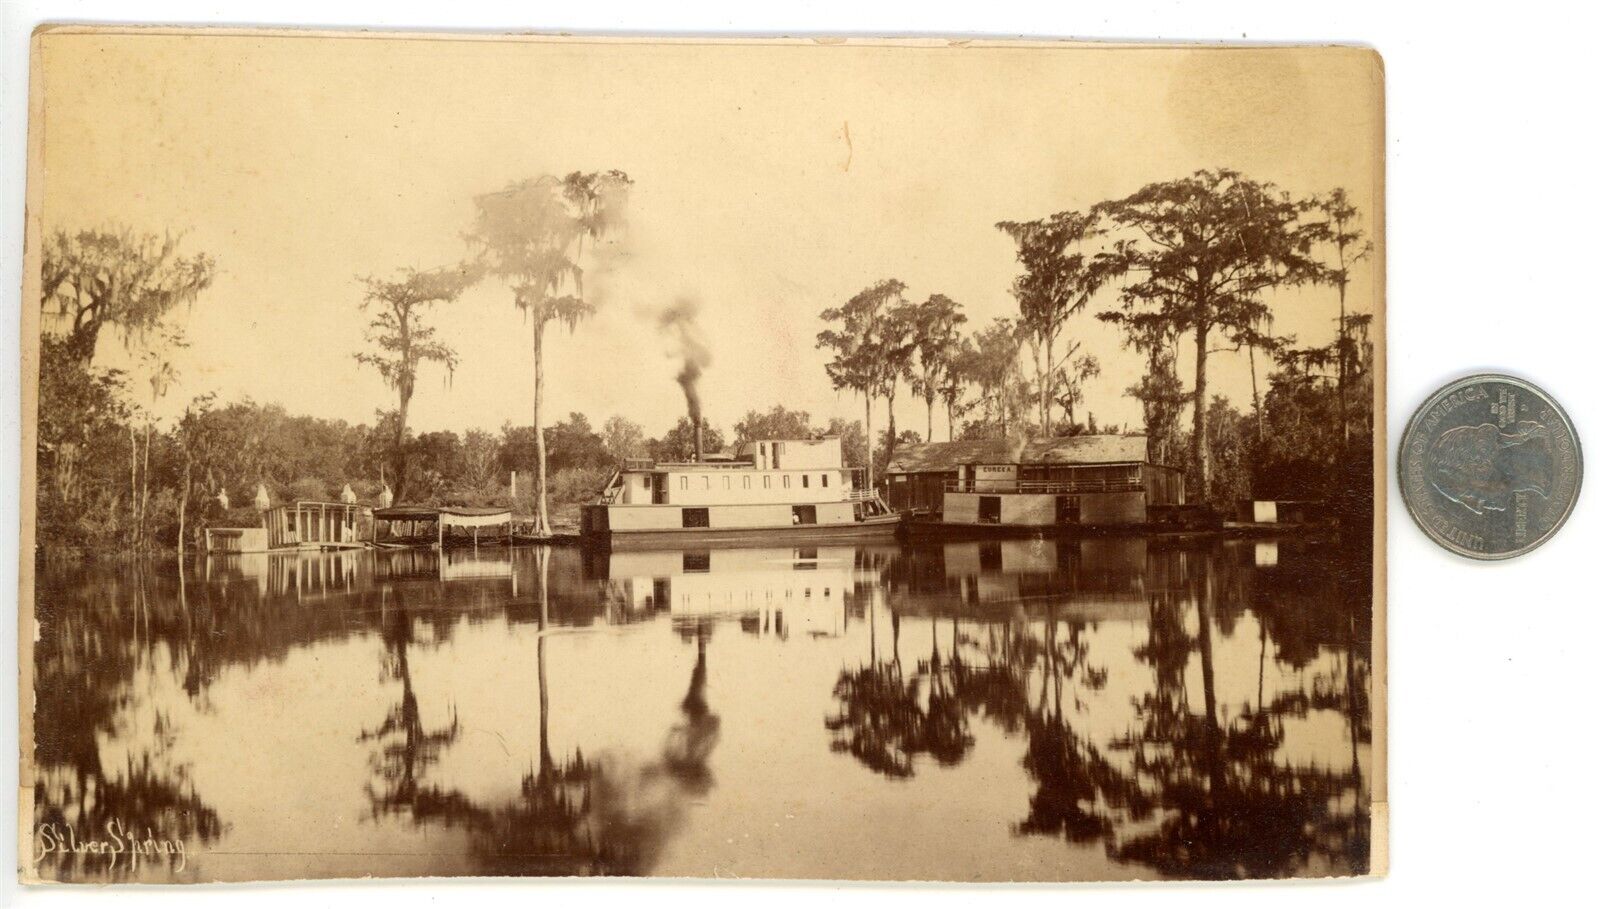 Silver Springs Florida FL - EARLY STEAMER AT DOCK - Vintage c1880s Photograph